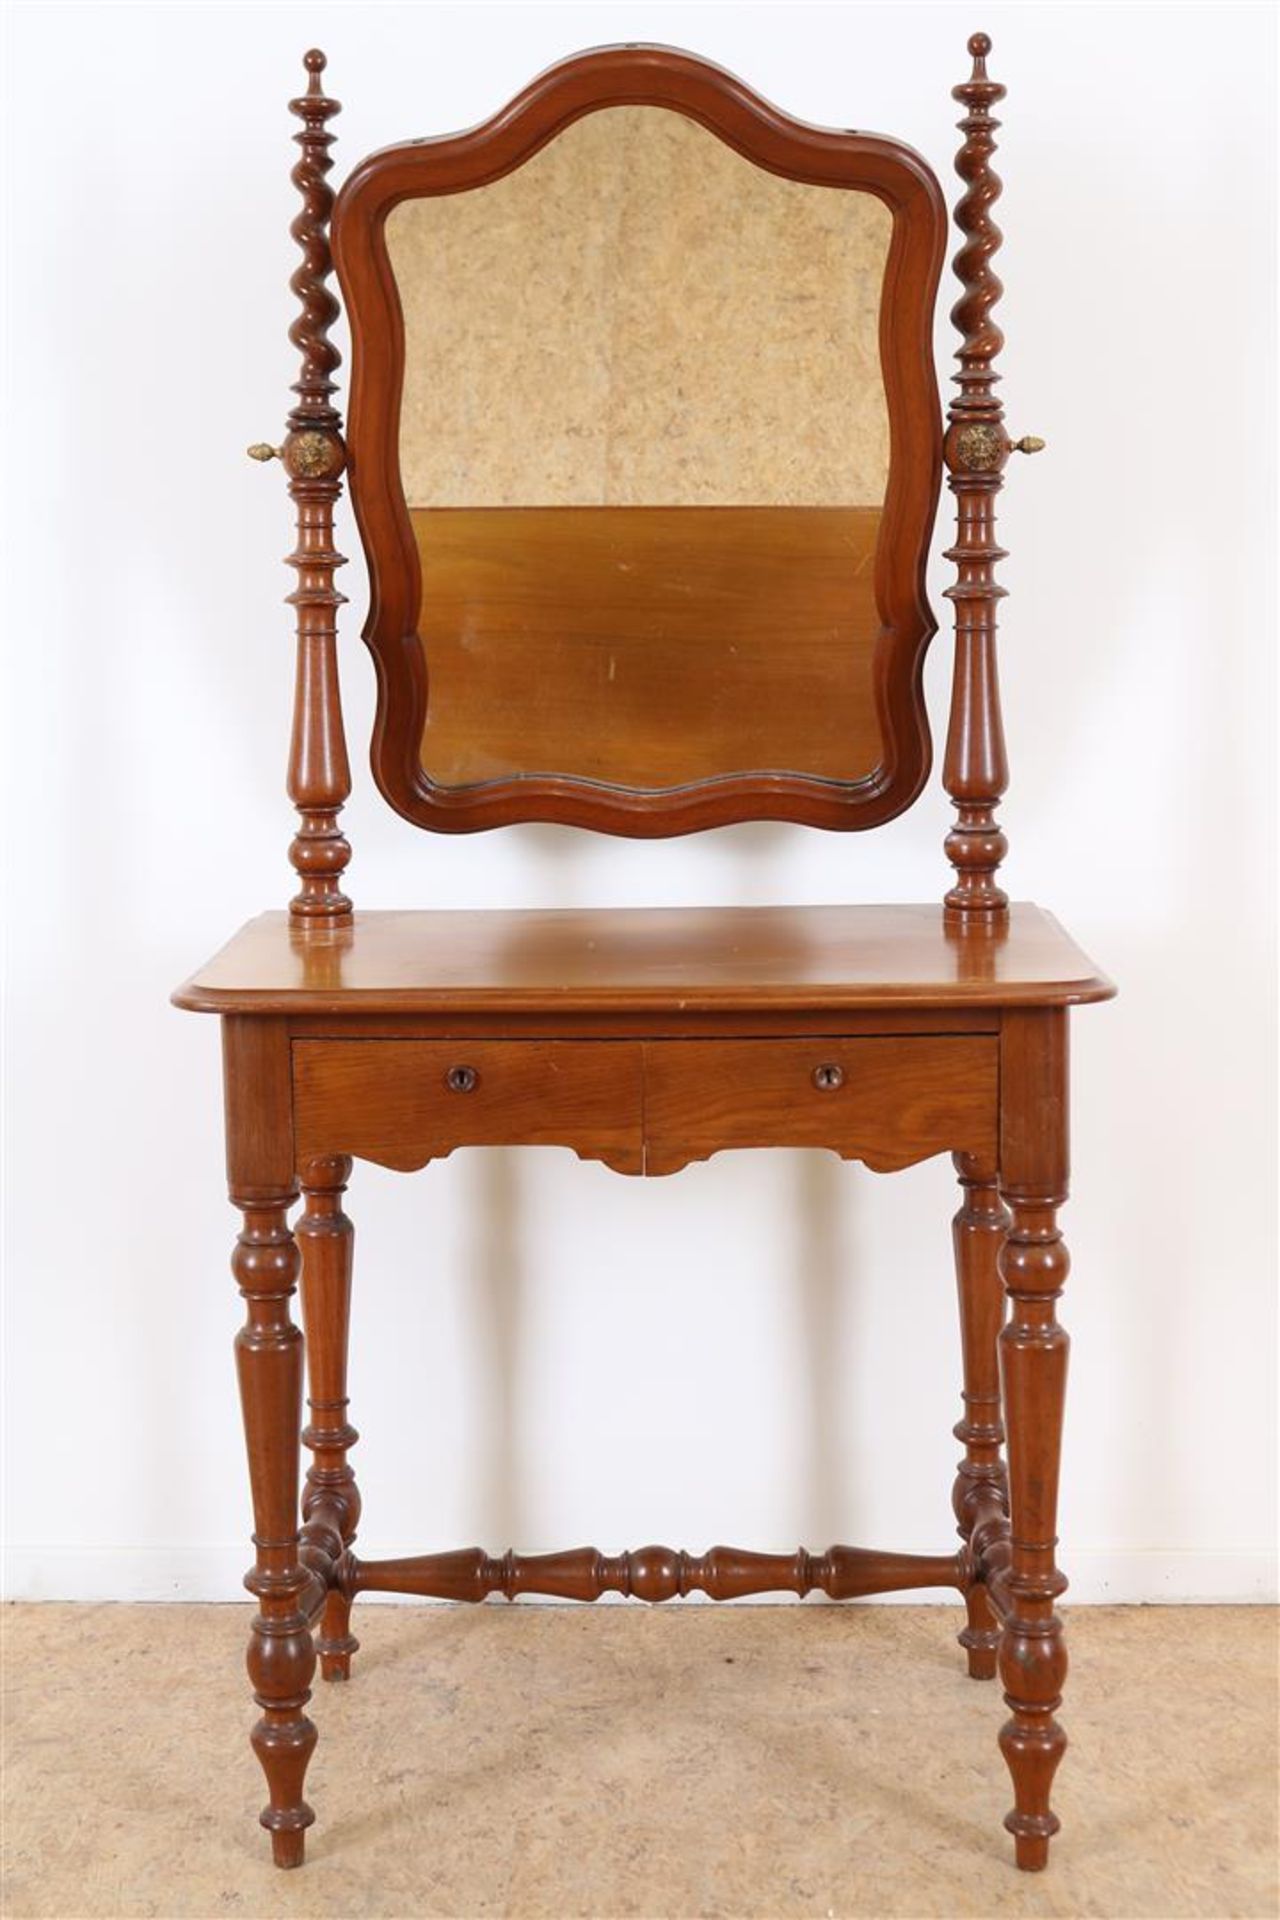 Mahogany Biedermeier dressing table with tilting mirror flanked by turned pilasters, 2 drawers on